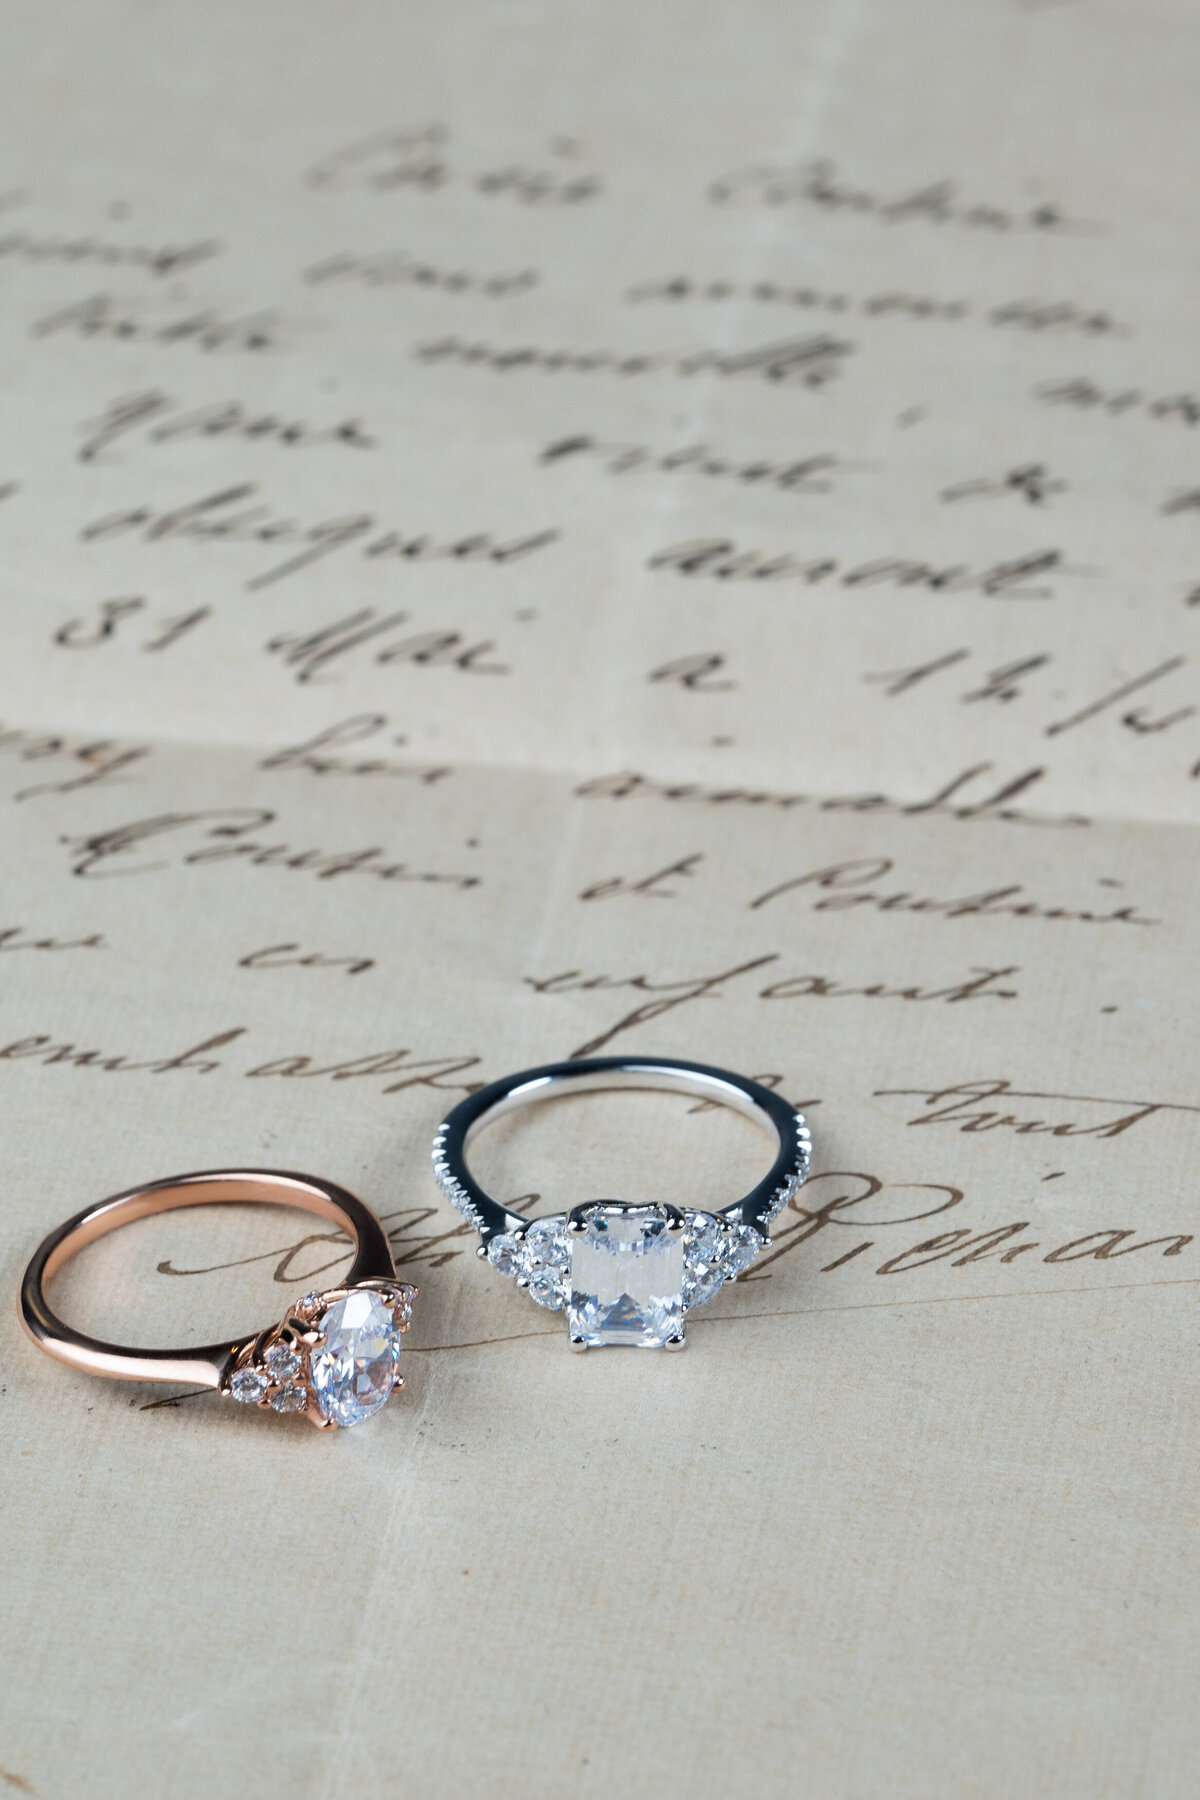 Delicate 3 stone accents flank these rose and white gold engagement rings